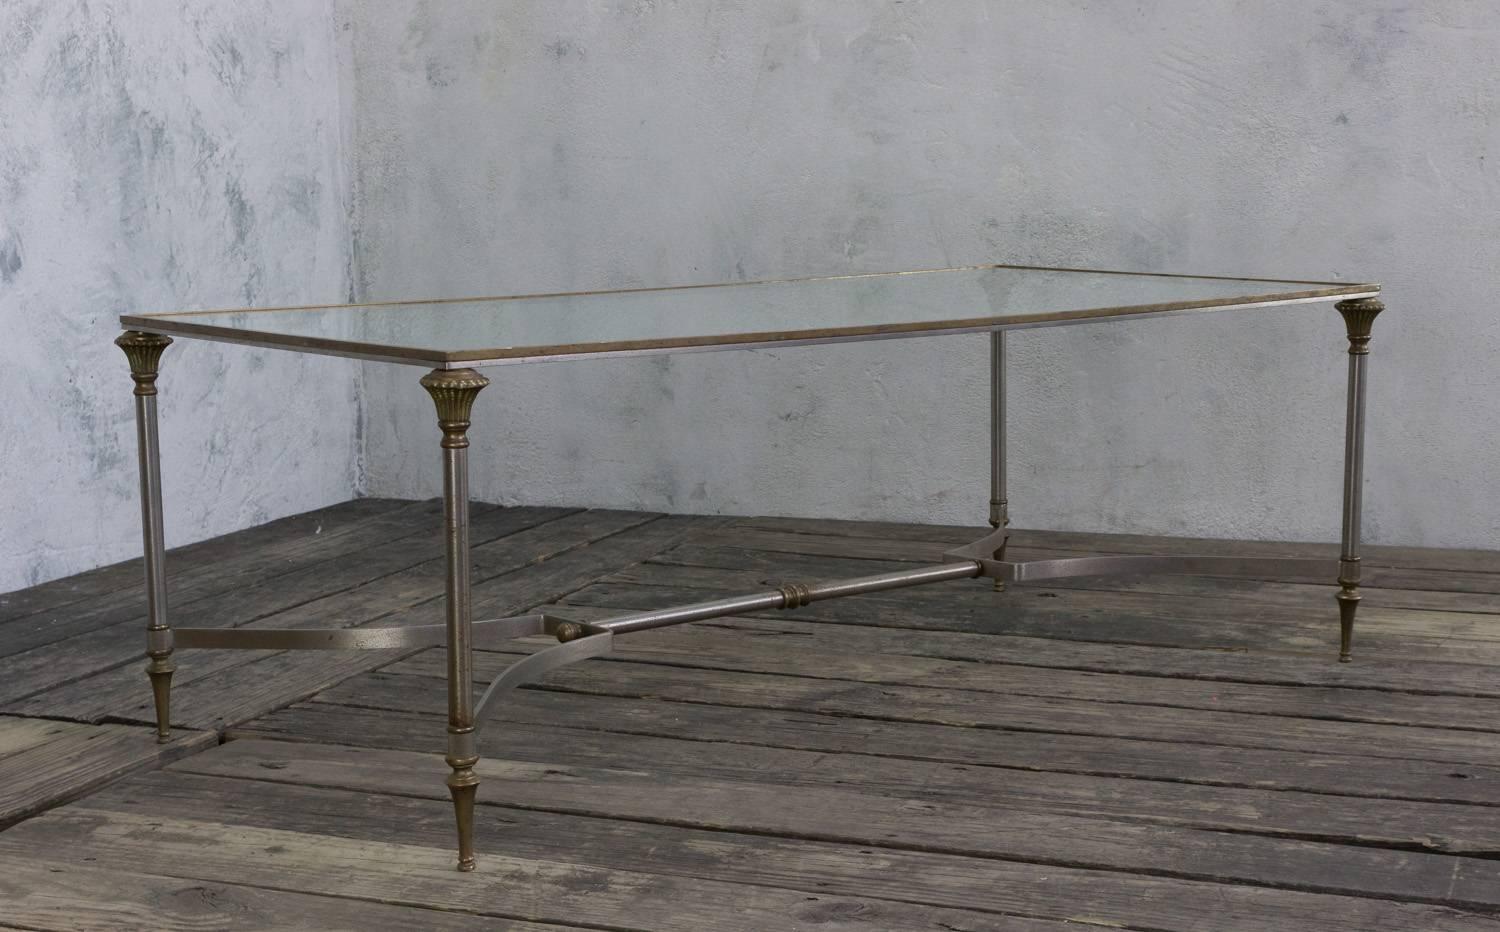 European coffee table with new glass top. The base is made of steel with brass accents with round legs and brass feet. Most likely made in Italy or France, circa 1950s.

Ref #: CT0210-02

Dimensions: 17